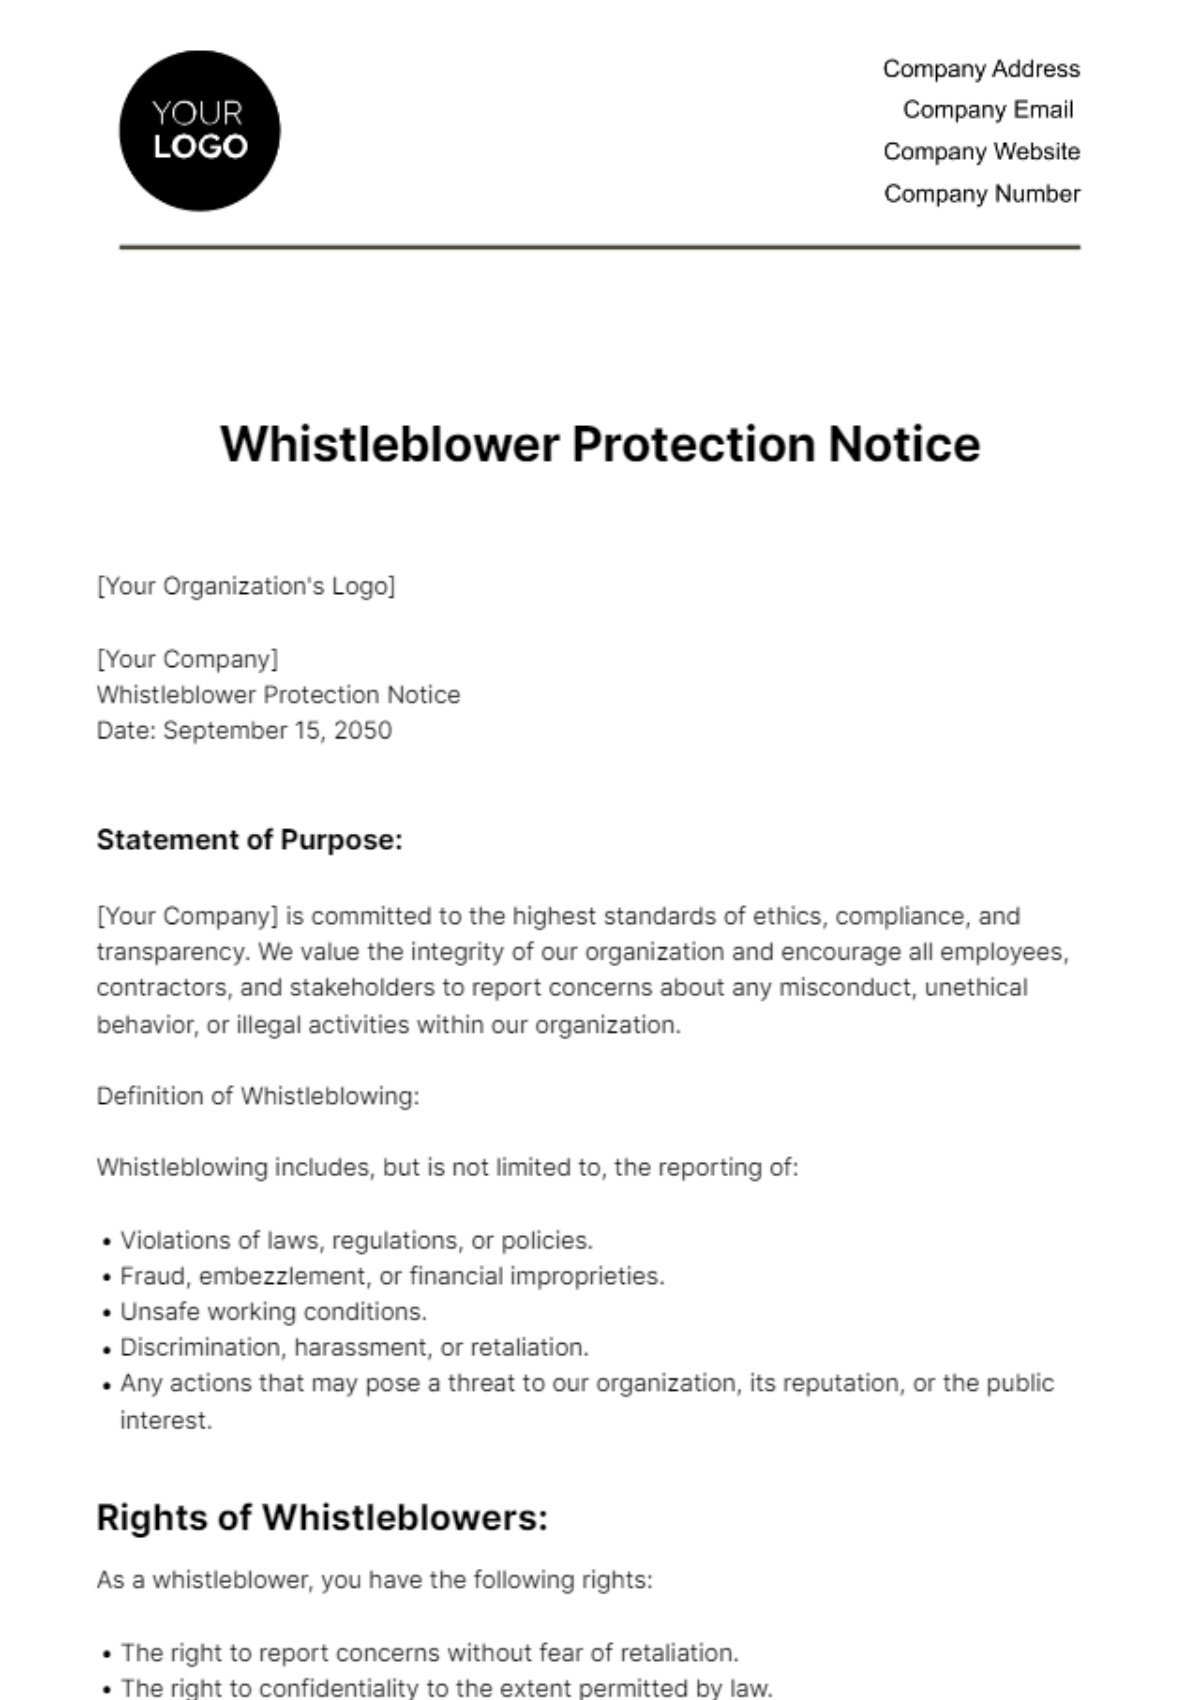 Whistleblower Protection Notice HR Template